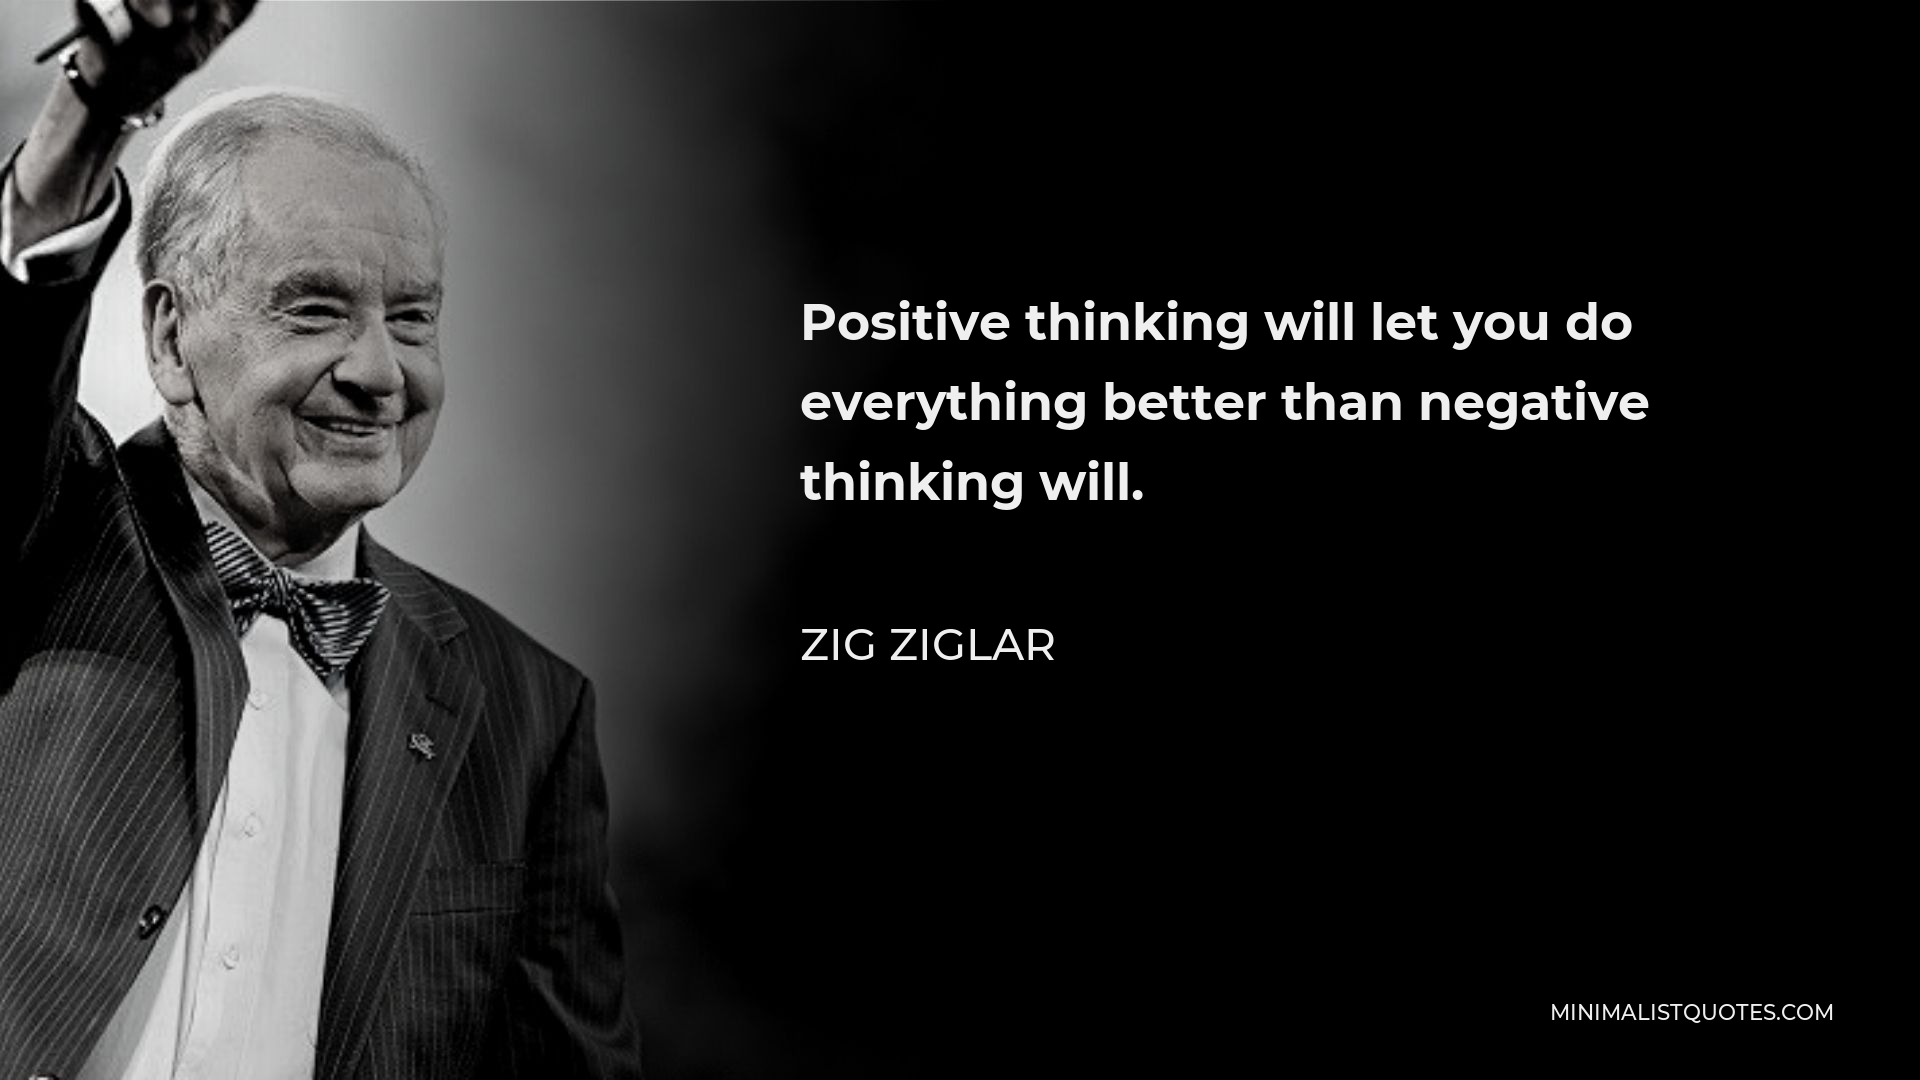 Zig Ziglar Quote - Positive thinking will let you do everything better than negative thinking will.